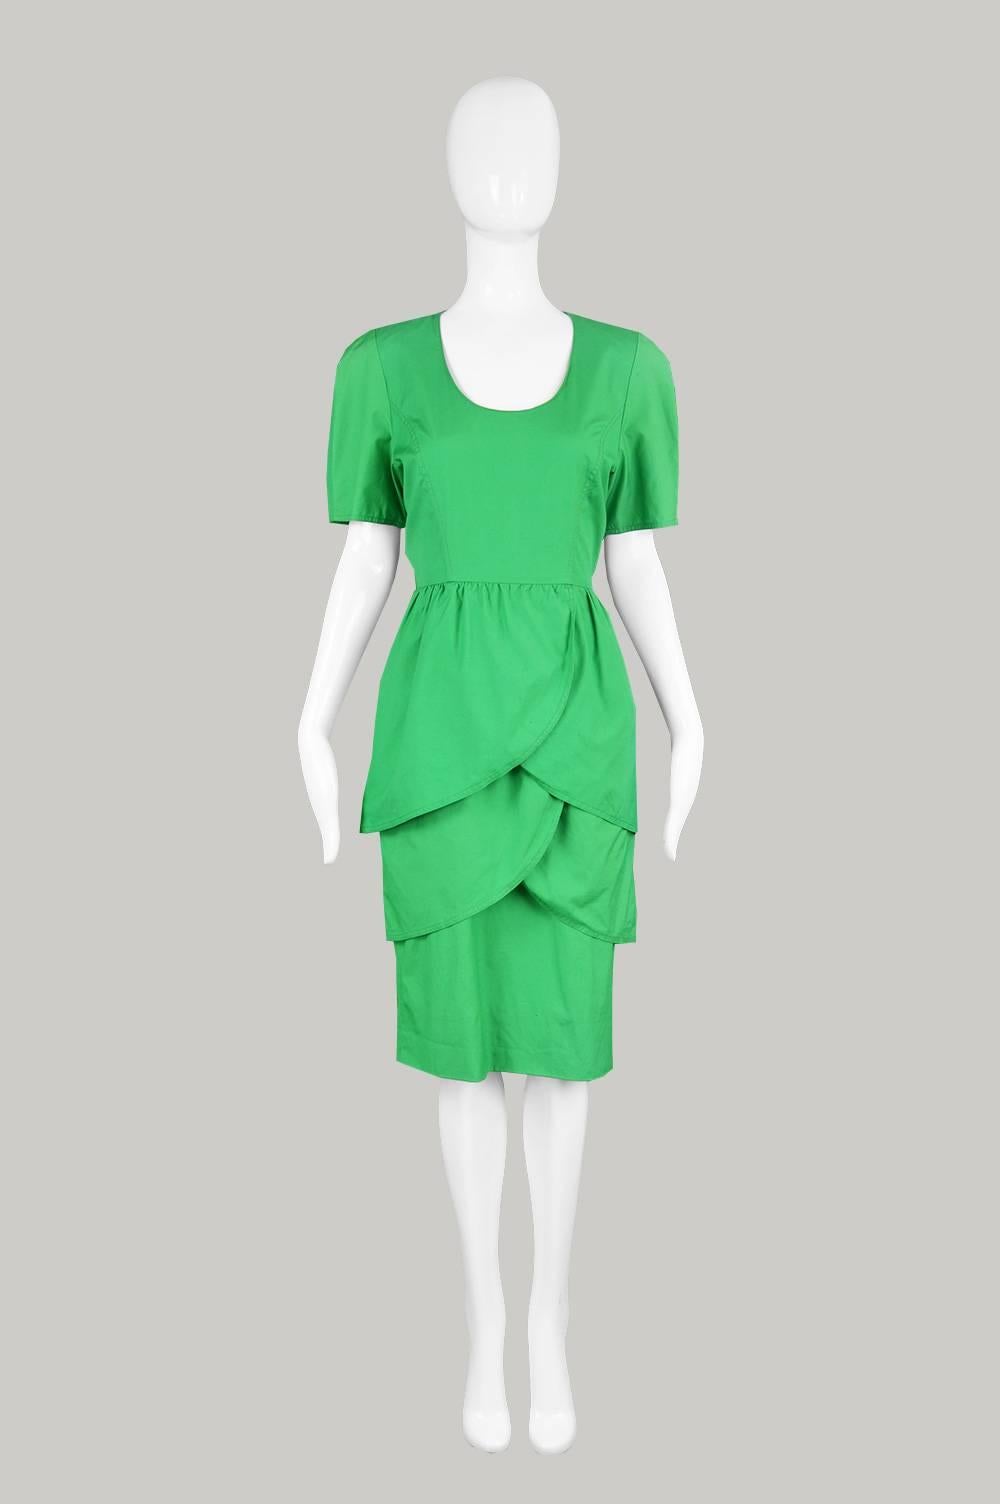 A chic vintage Guy Laroche dress from the 80s for the Paris boutique line, in a green cotton with a layered tulip skirt and a deep scoop neck. 

Estimated Size: UK 10-12/ US 6-8/ EU 38-40
Bust - 36” / 91cm
Waist - 28” / 71cm
Hips - 40” /